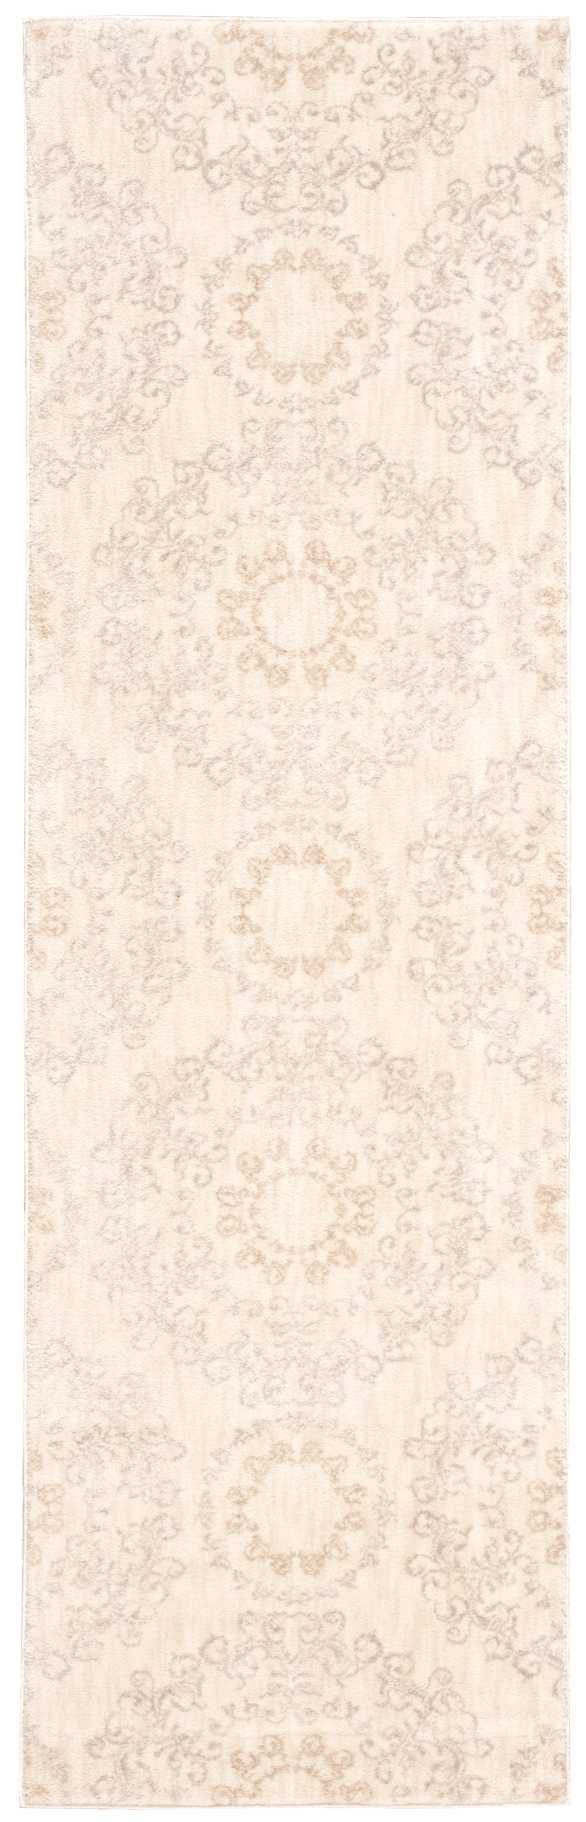 Nourison Home Tranquility TNQ03 Ivory Transitional Machinemade Rug